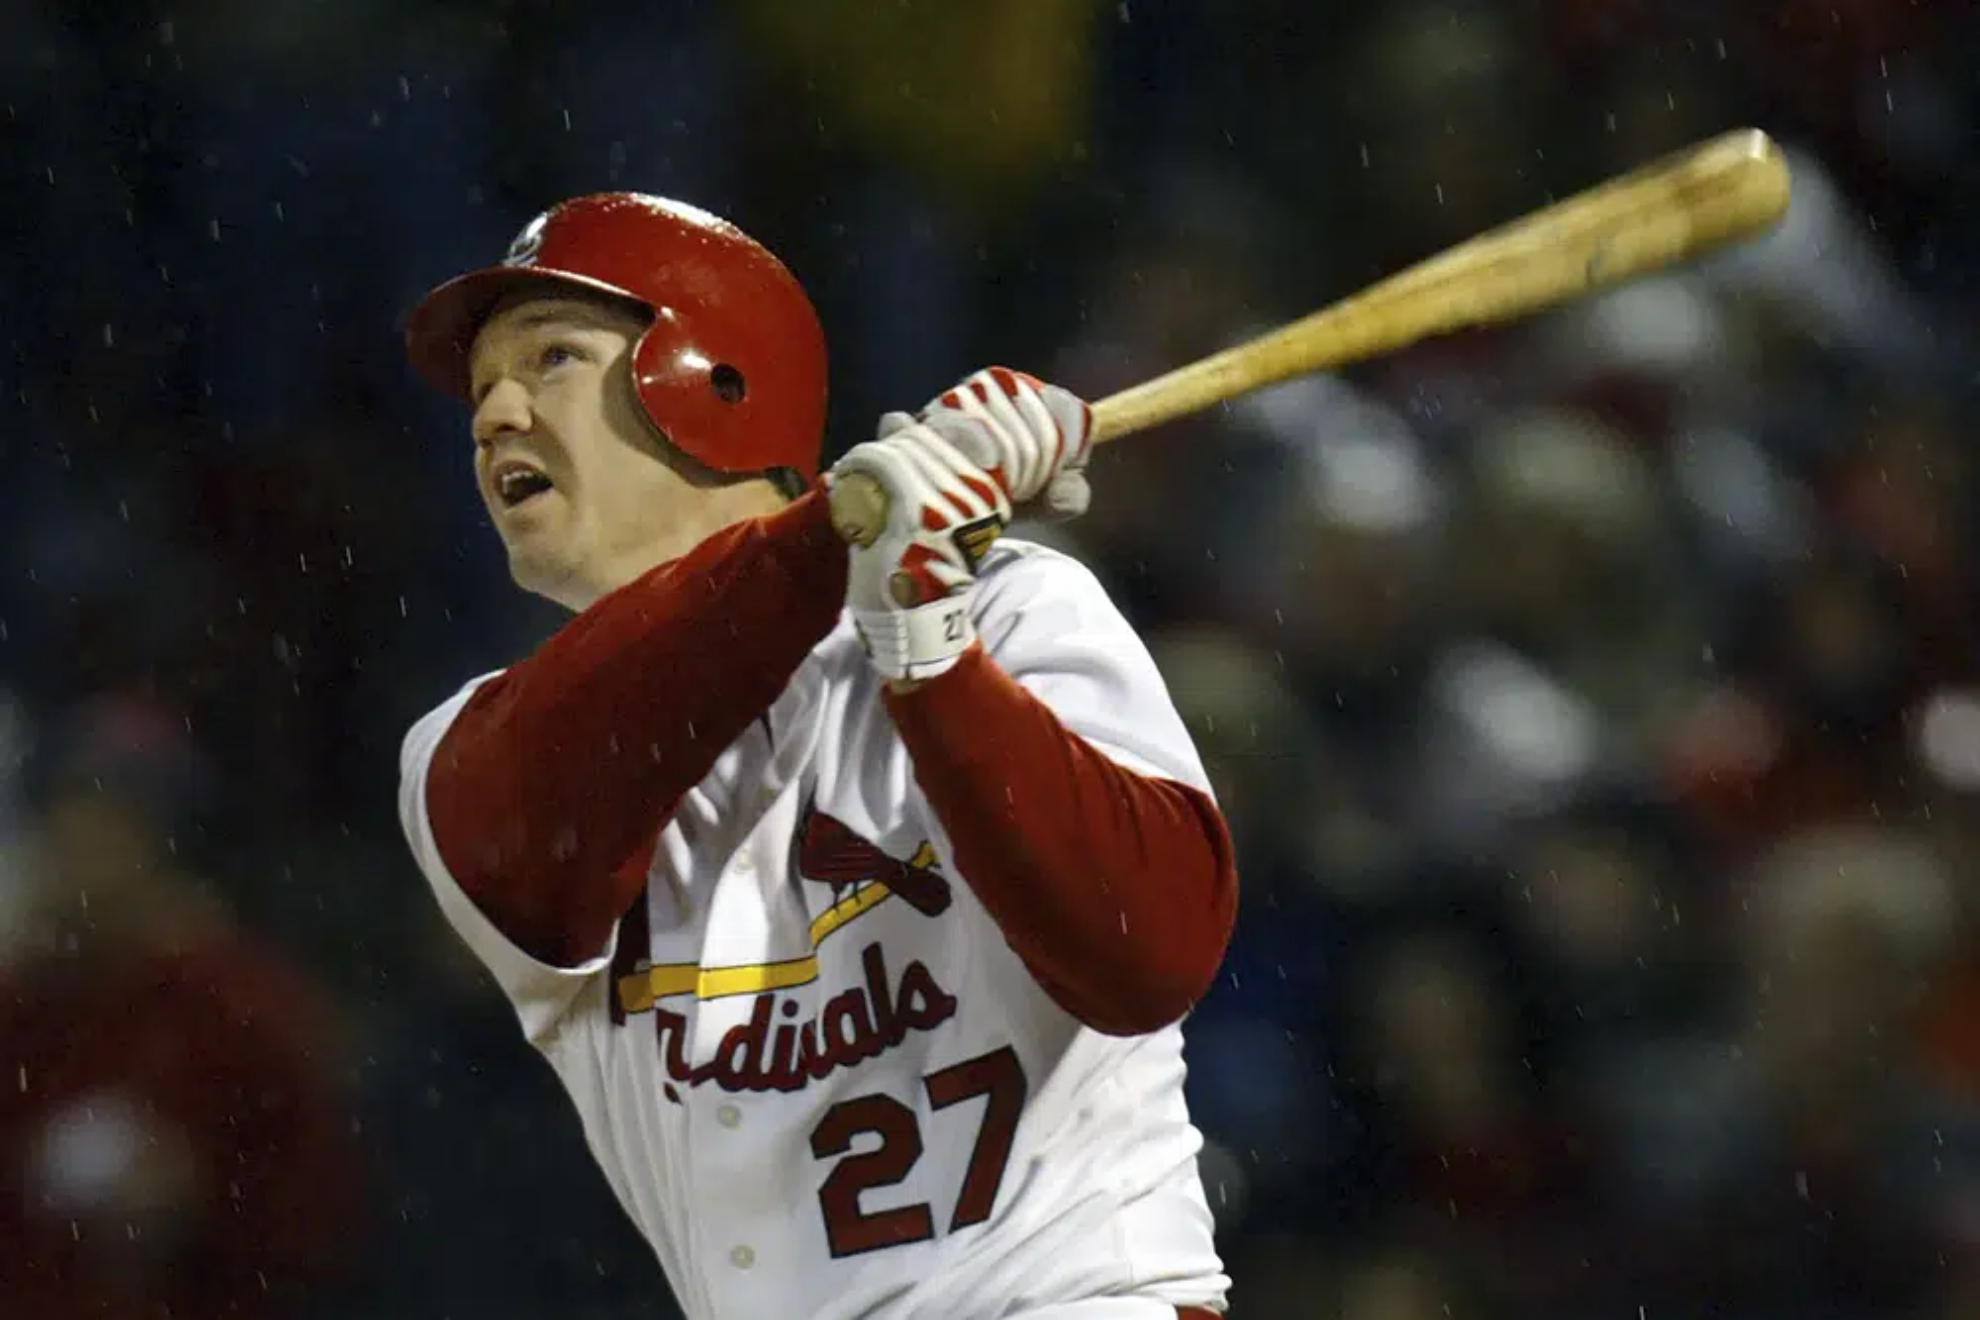 Scott Rolen will be inducted to baseballs Hall of Fame